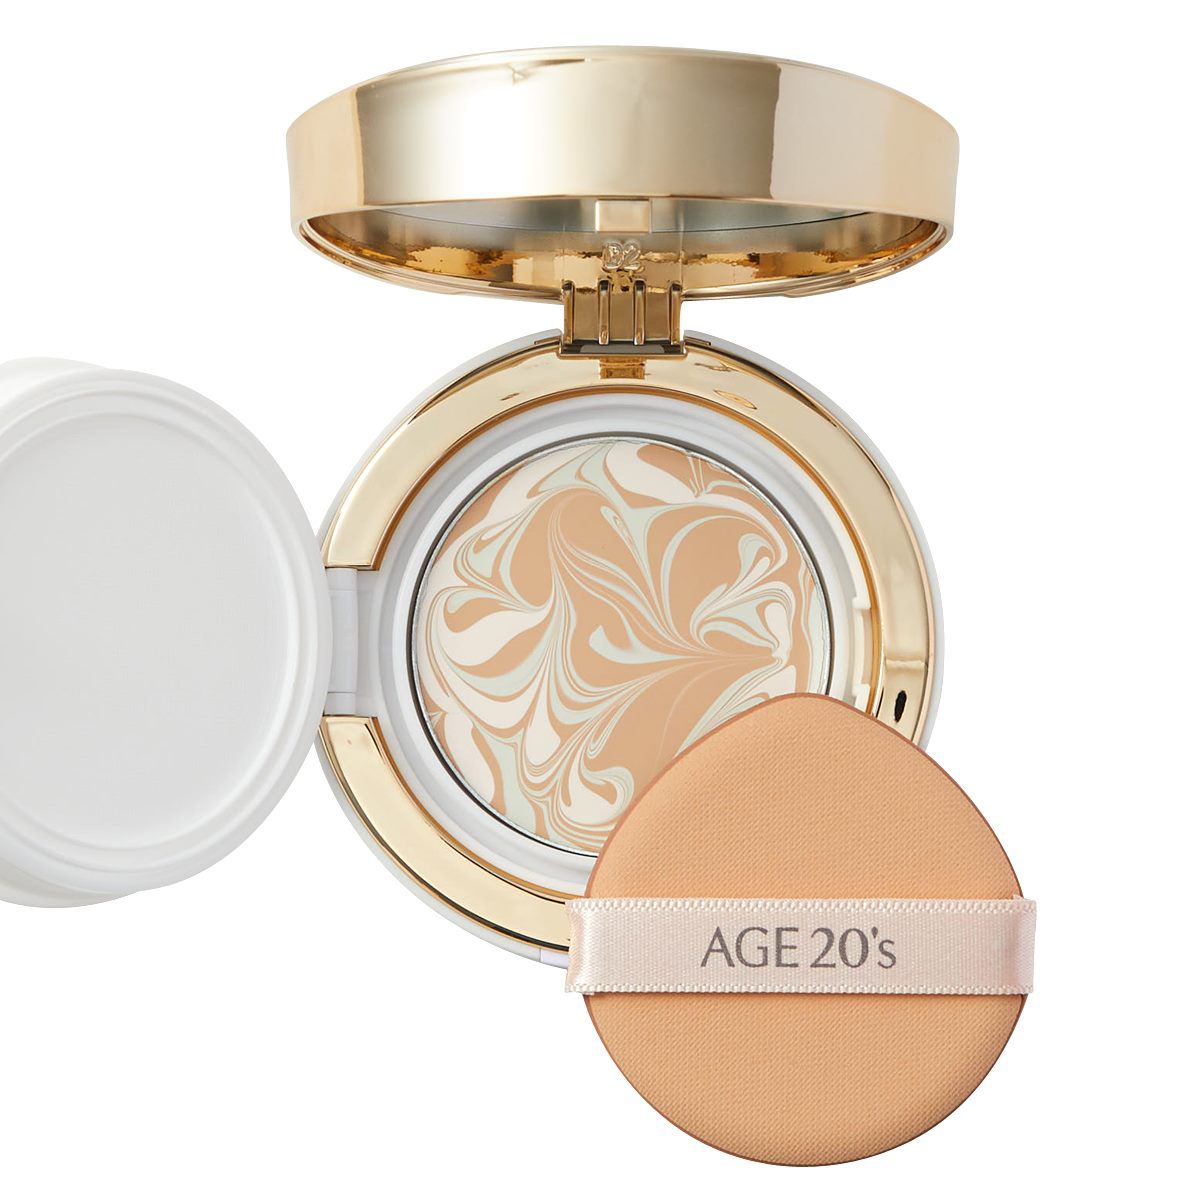 AGE 20's Signature Essence Cover Pact Long Stay SPF50+/PA++++ (no.13) 14g*2のバリエーション1